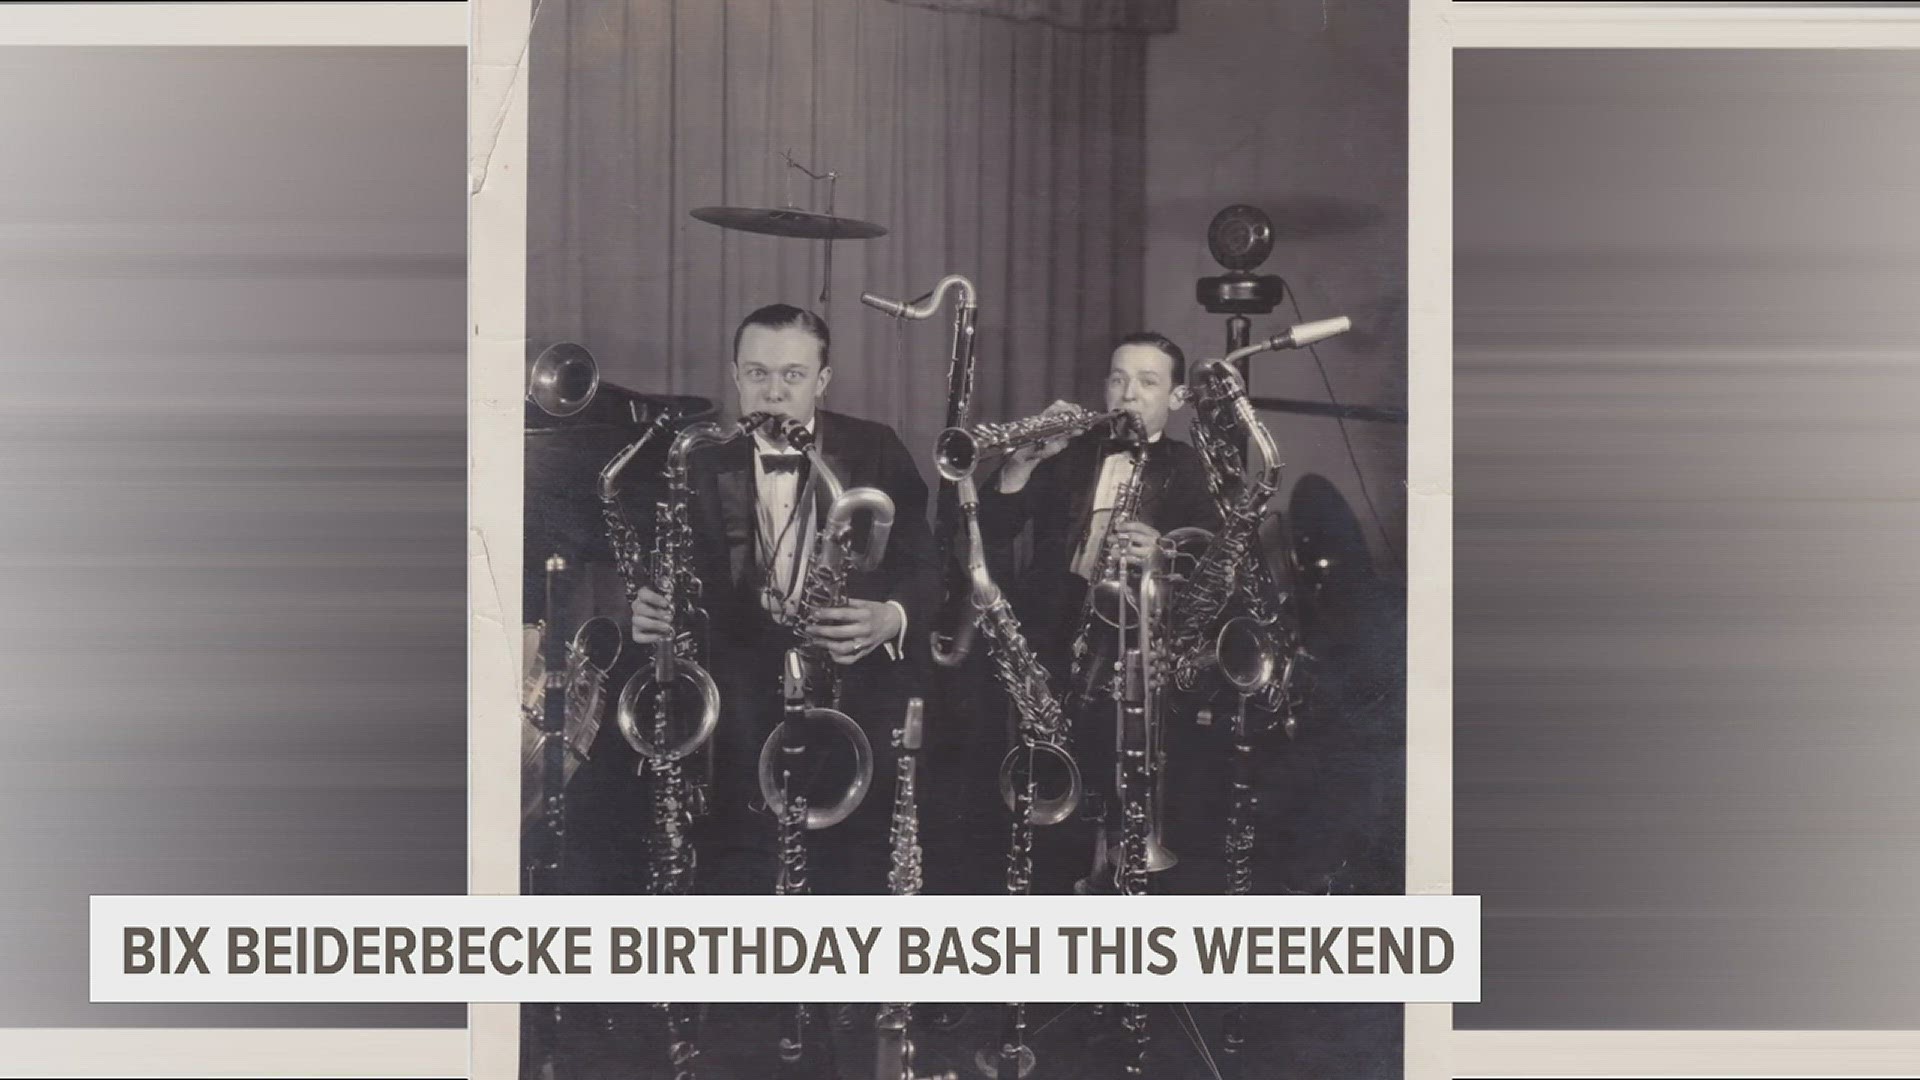 Celebrate Bix Beiderbecke's birthday with live music, food, conversations and the playing of Don Murray's tenor sax for the first time in 95 years on March 9 and 10.